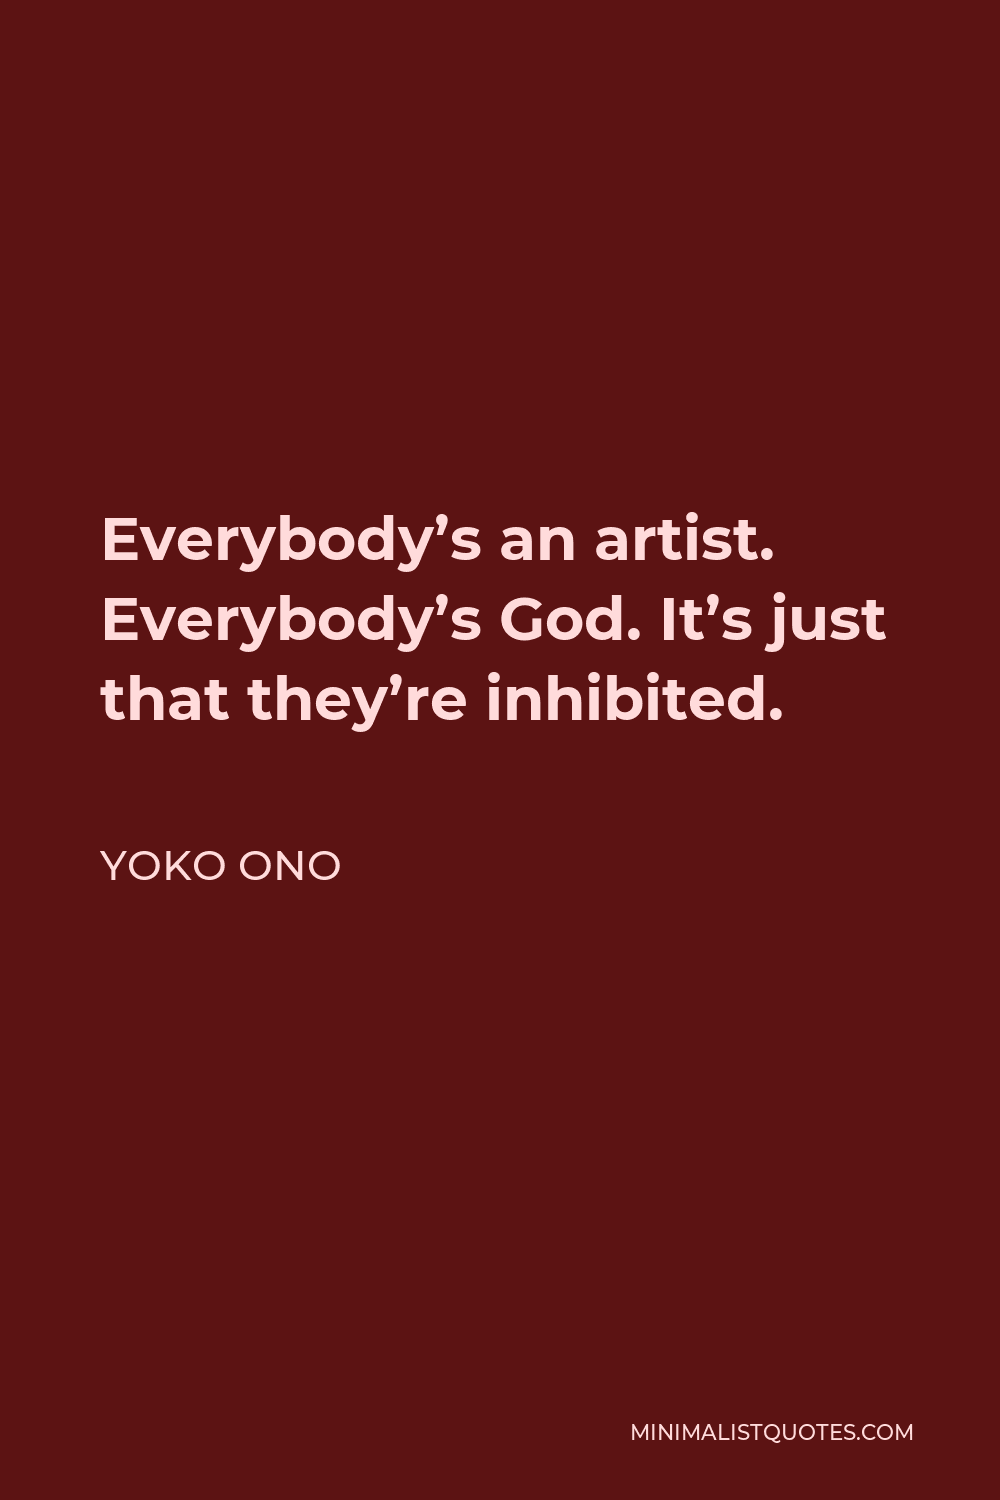 Yoko Ono Quote - Everybody’s an artist. Everybody’s God. It’s just that they’re inhibited.